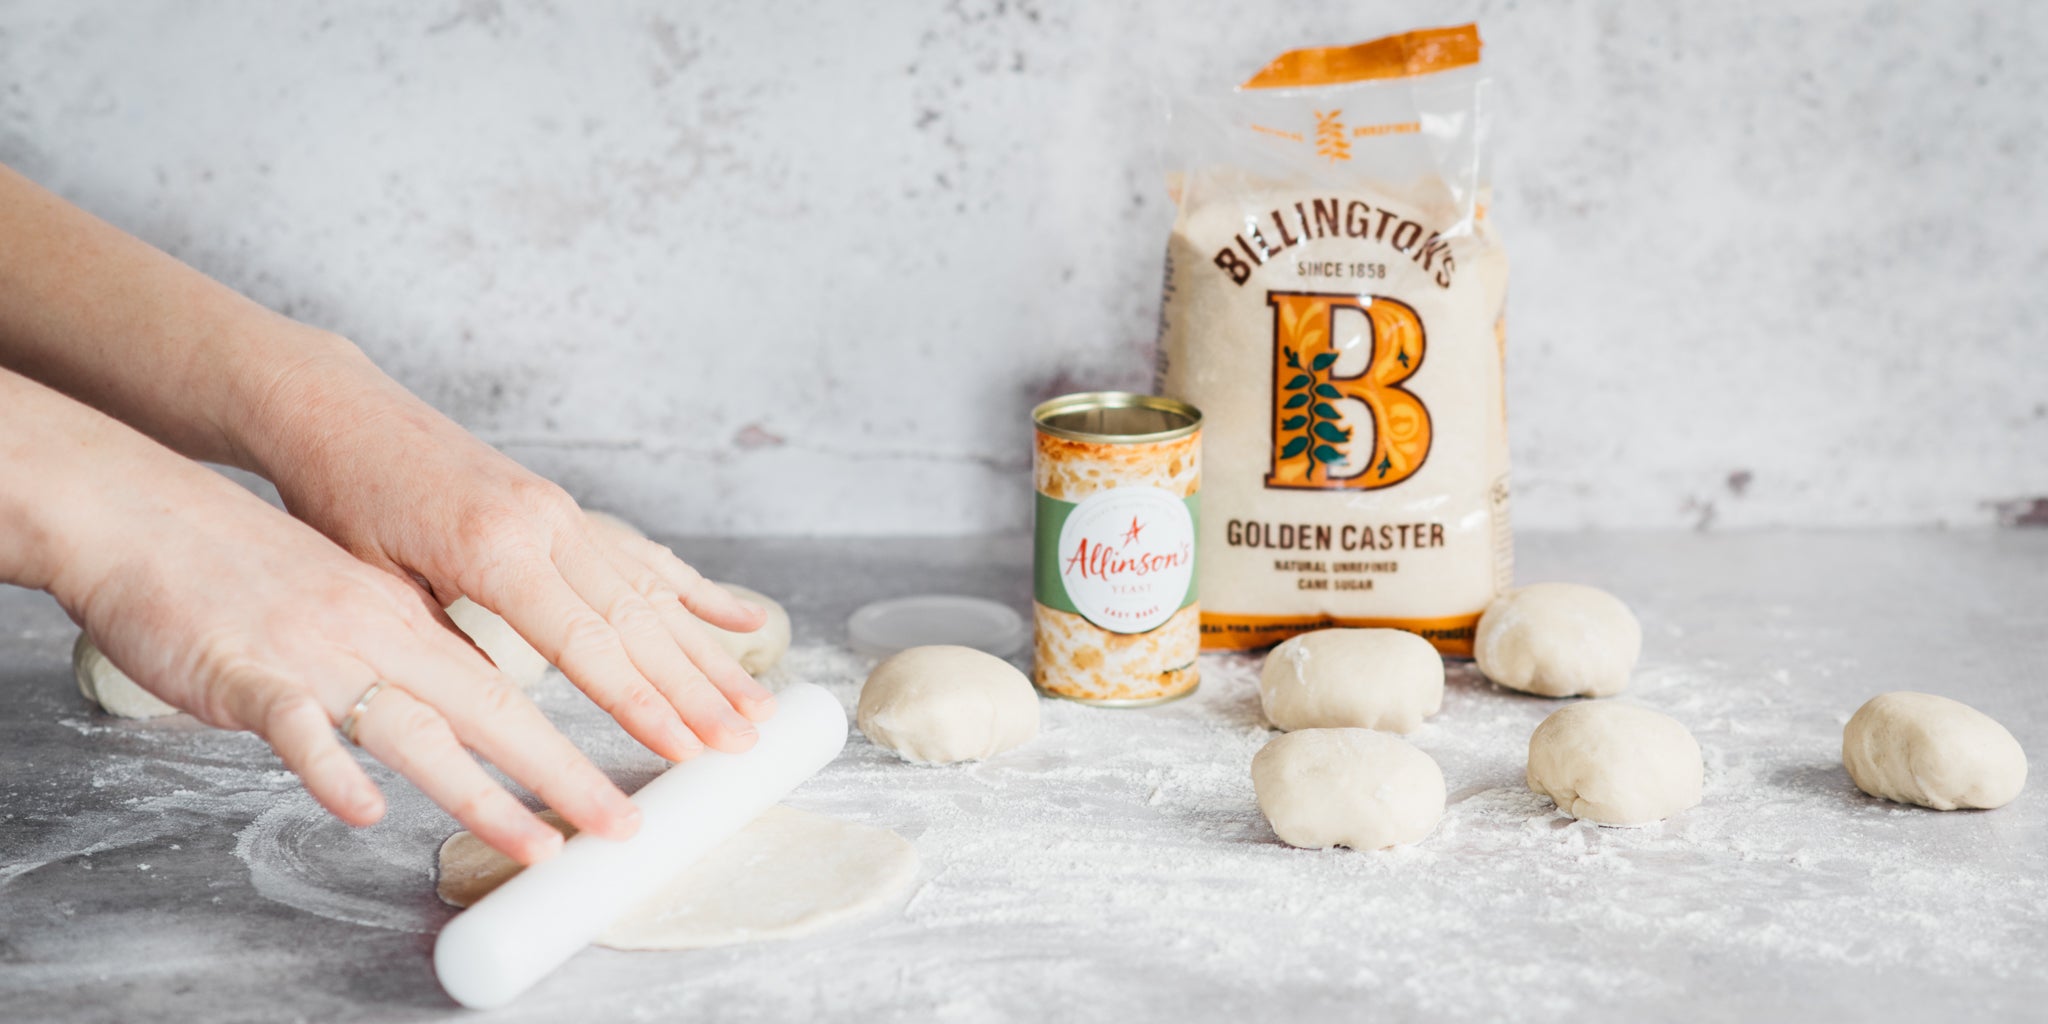 Hands rolling out bao bun dough and tin of yeast and sugar in background